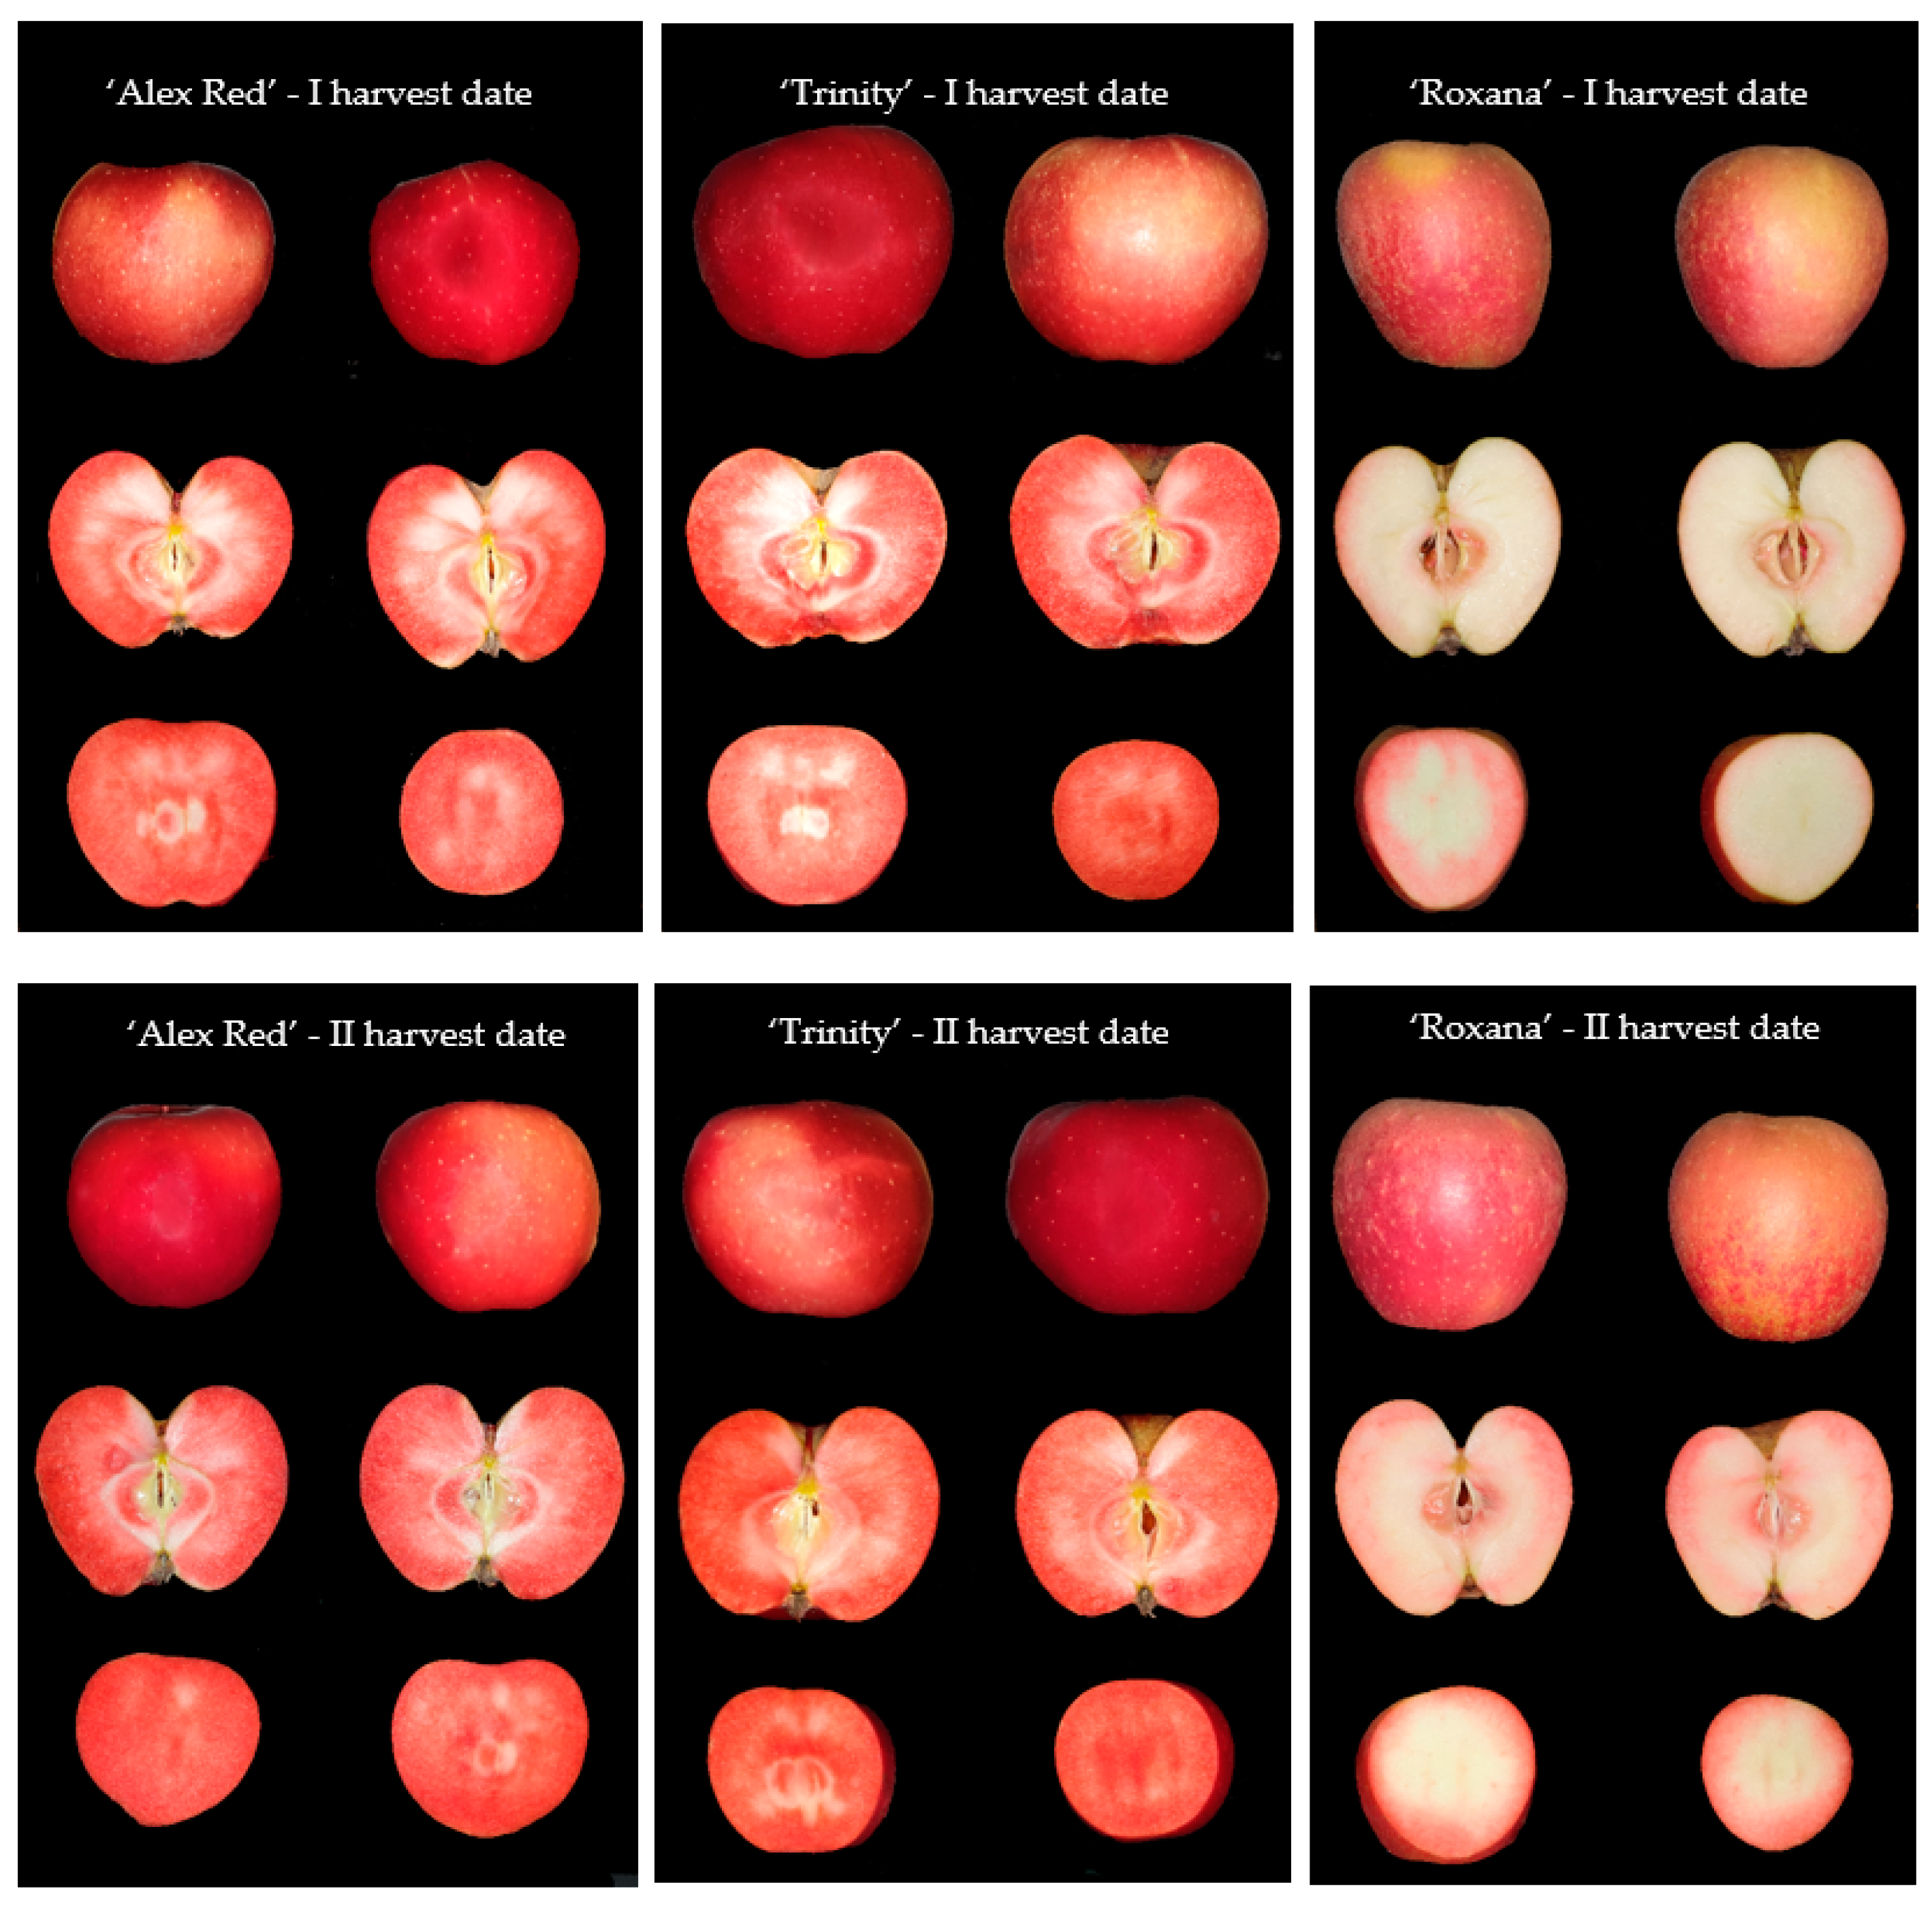 Breeding red-fleshed apples – introduction — Science Learning Hub